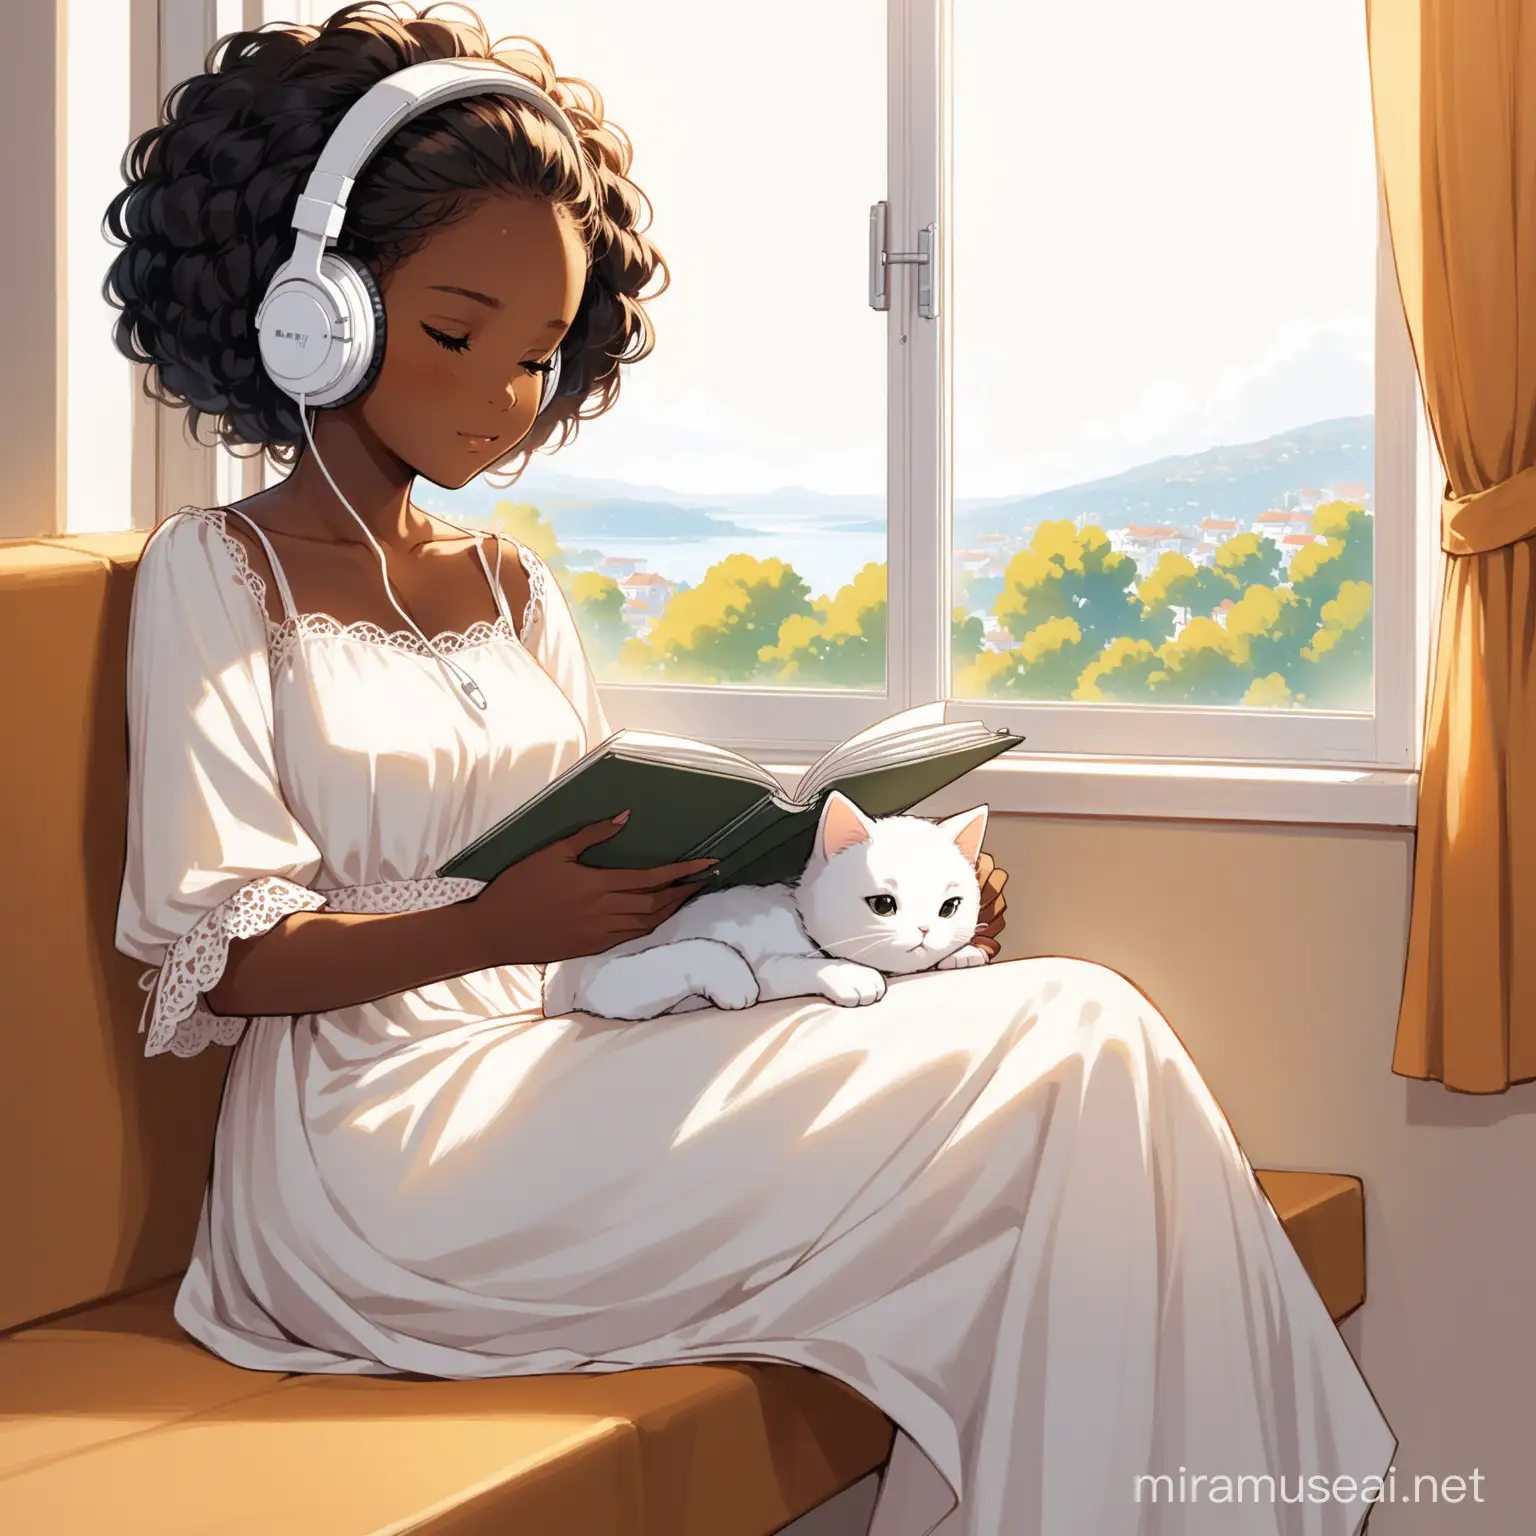 Creative Relaxation Black Girl in Flower Dress Sketching by Window Seat with White Cat